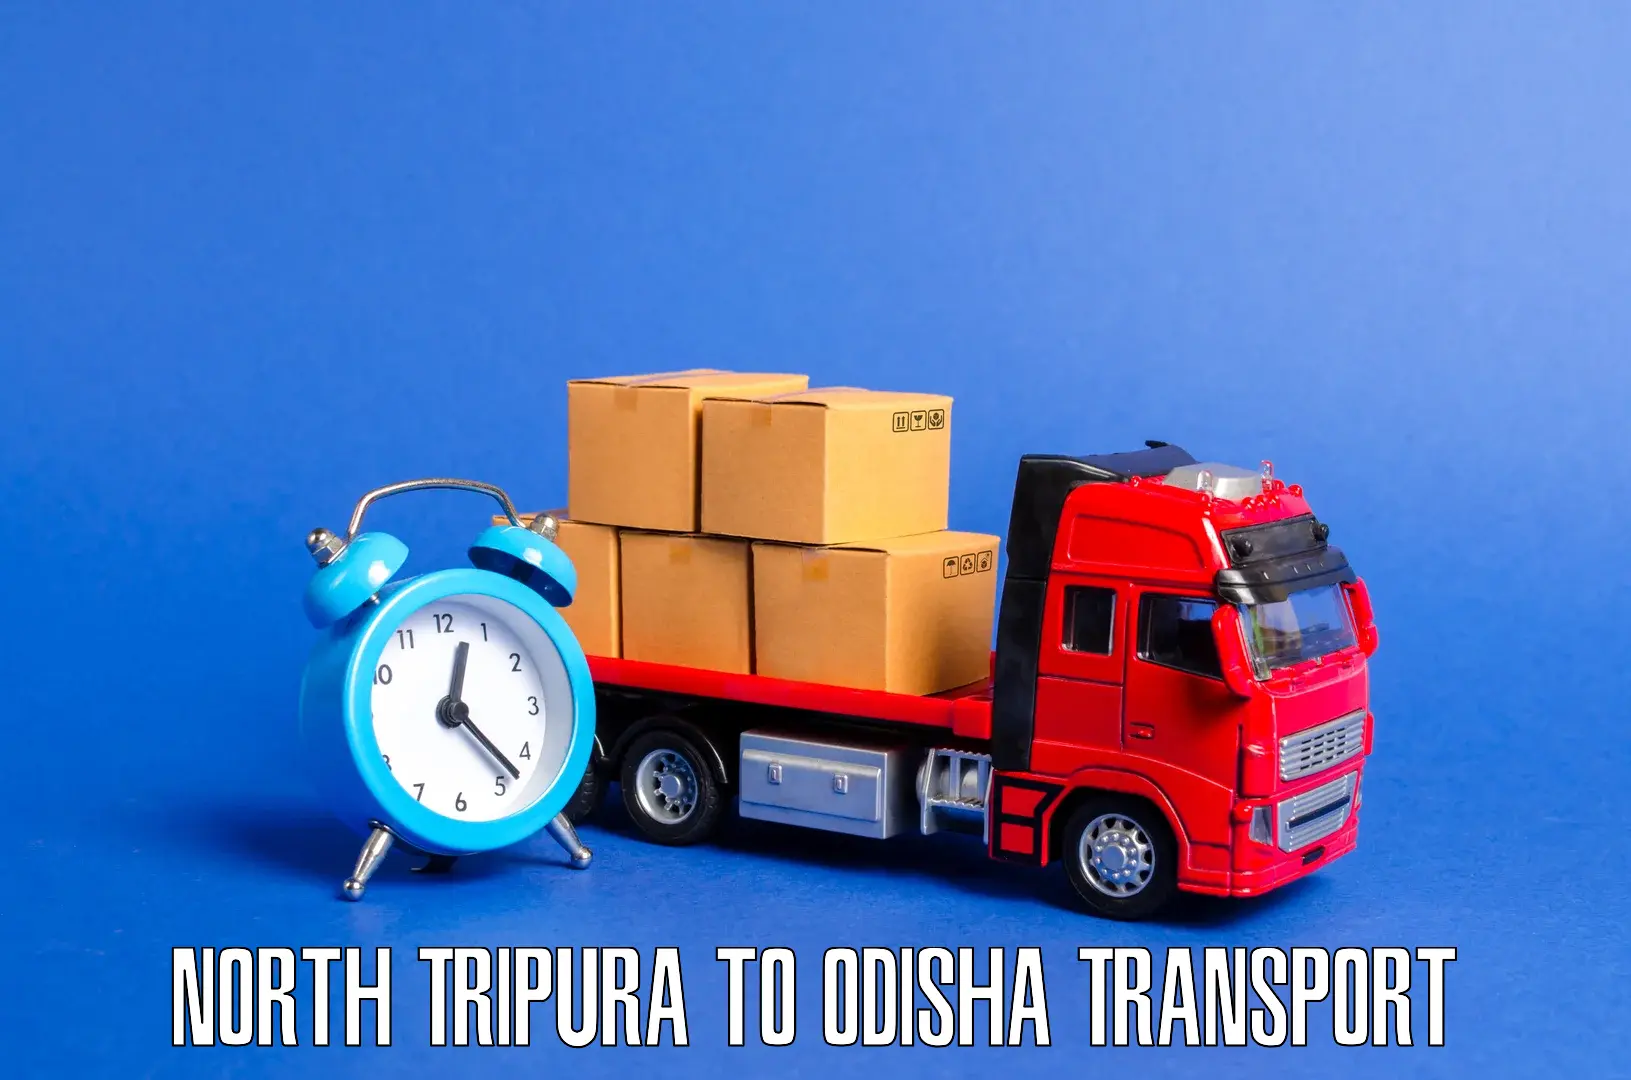 Shipping services North Tripura to Gajapati